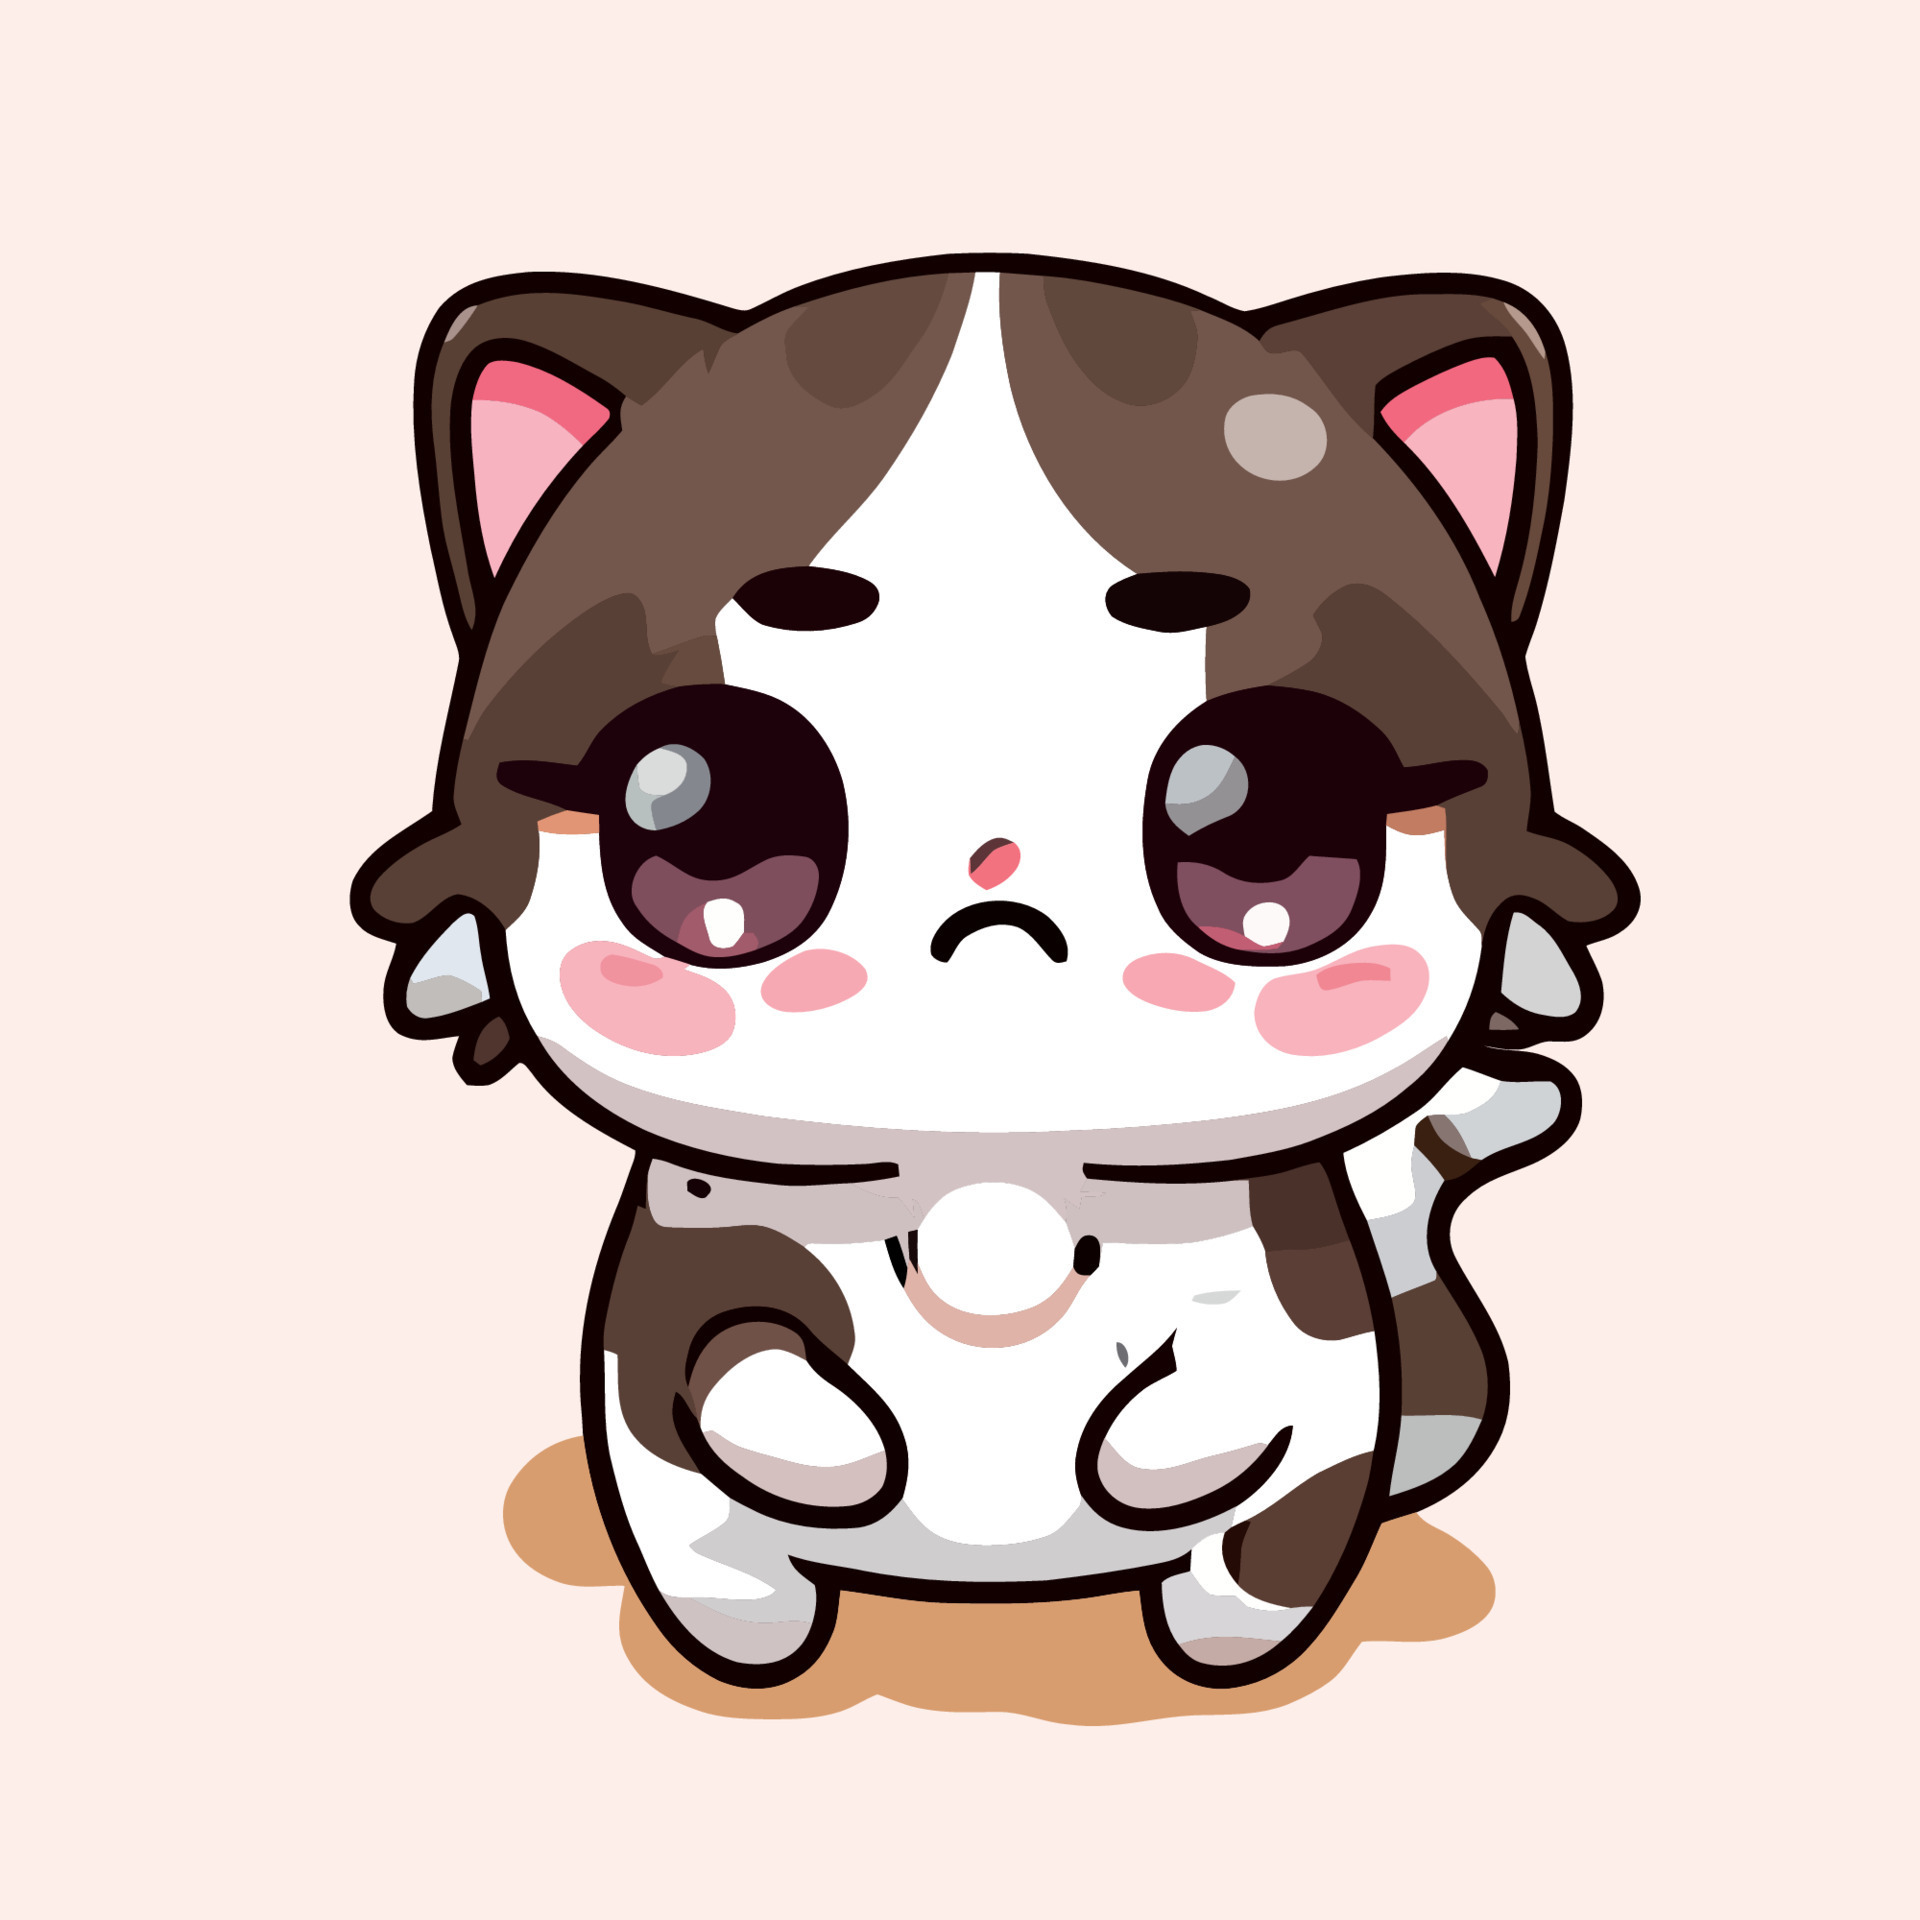 Kawaii cute fat white cat anime style Royalty Free Vector